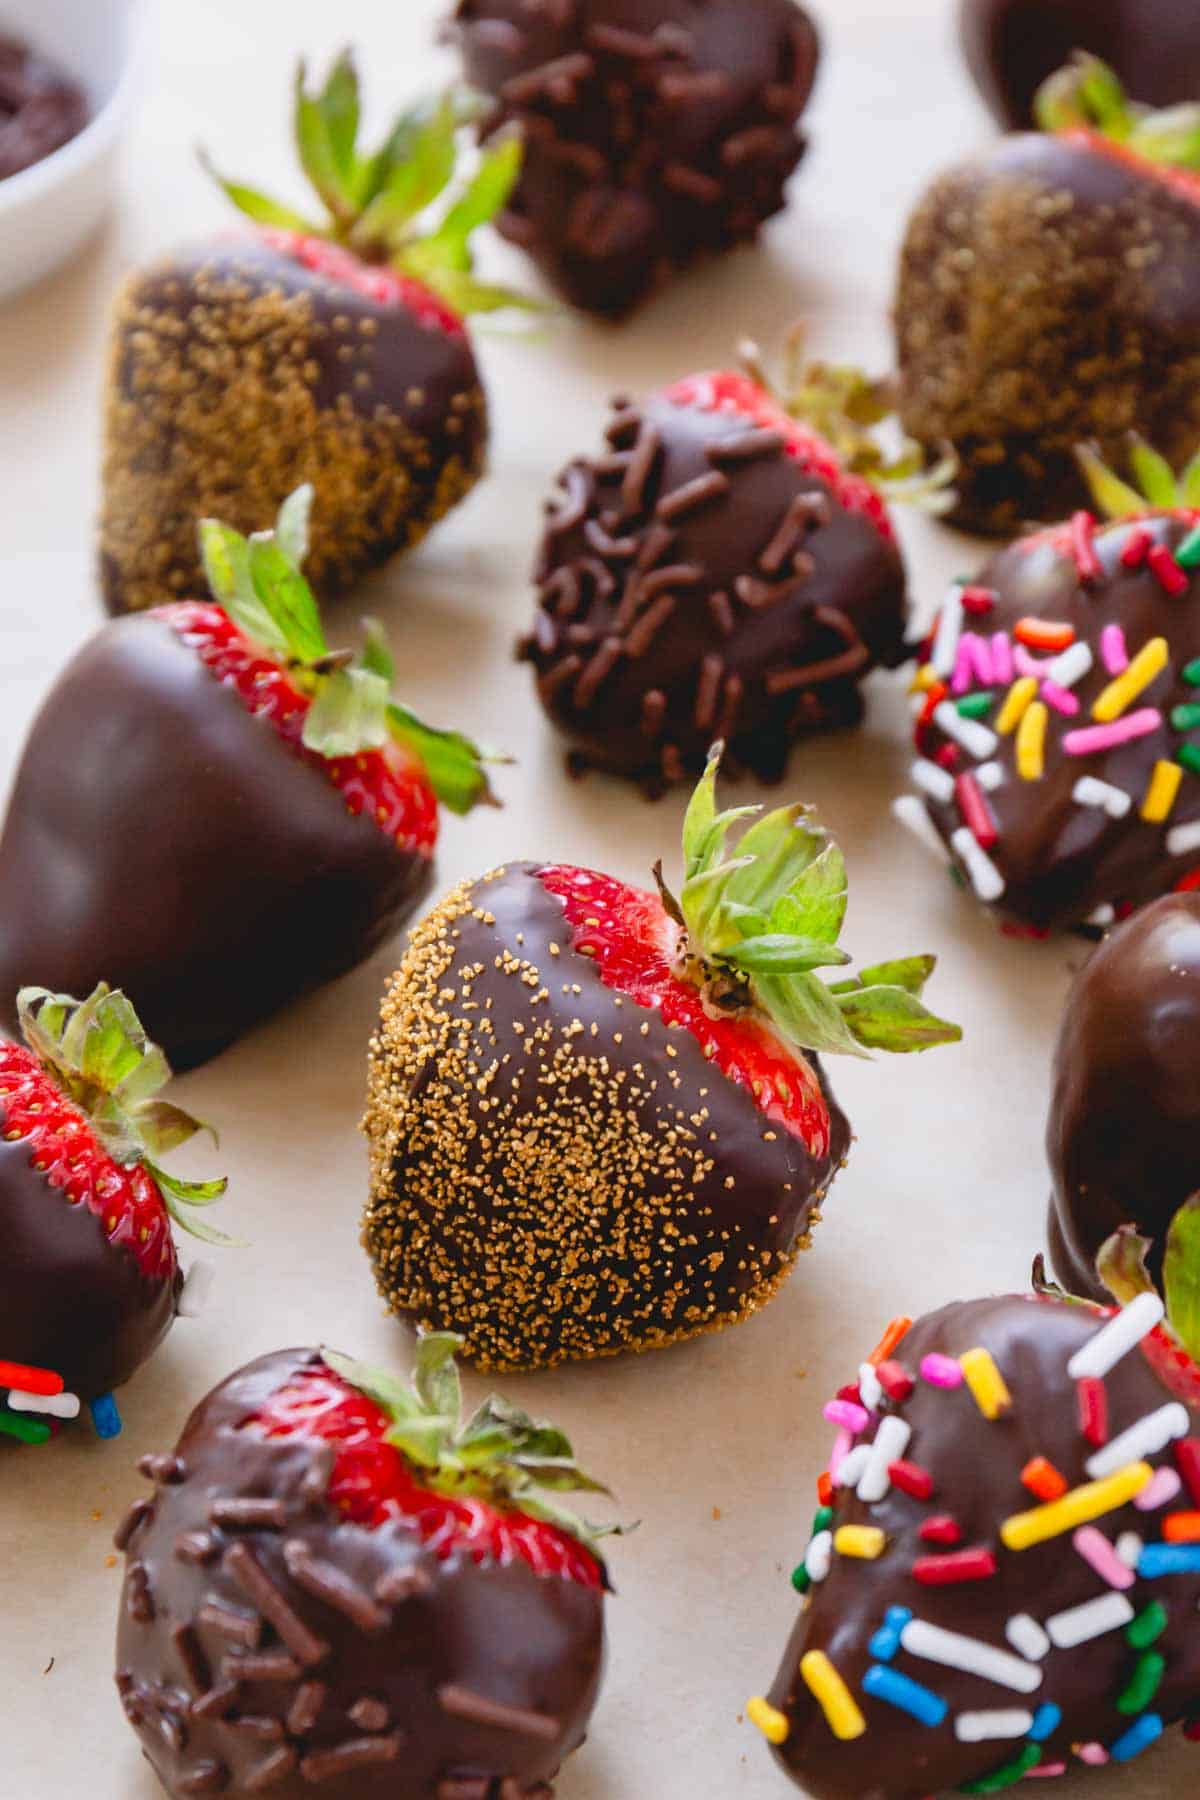 Chocolate covered strawberries coated with different sprinkles on a parchment paper-lined baking sheet.